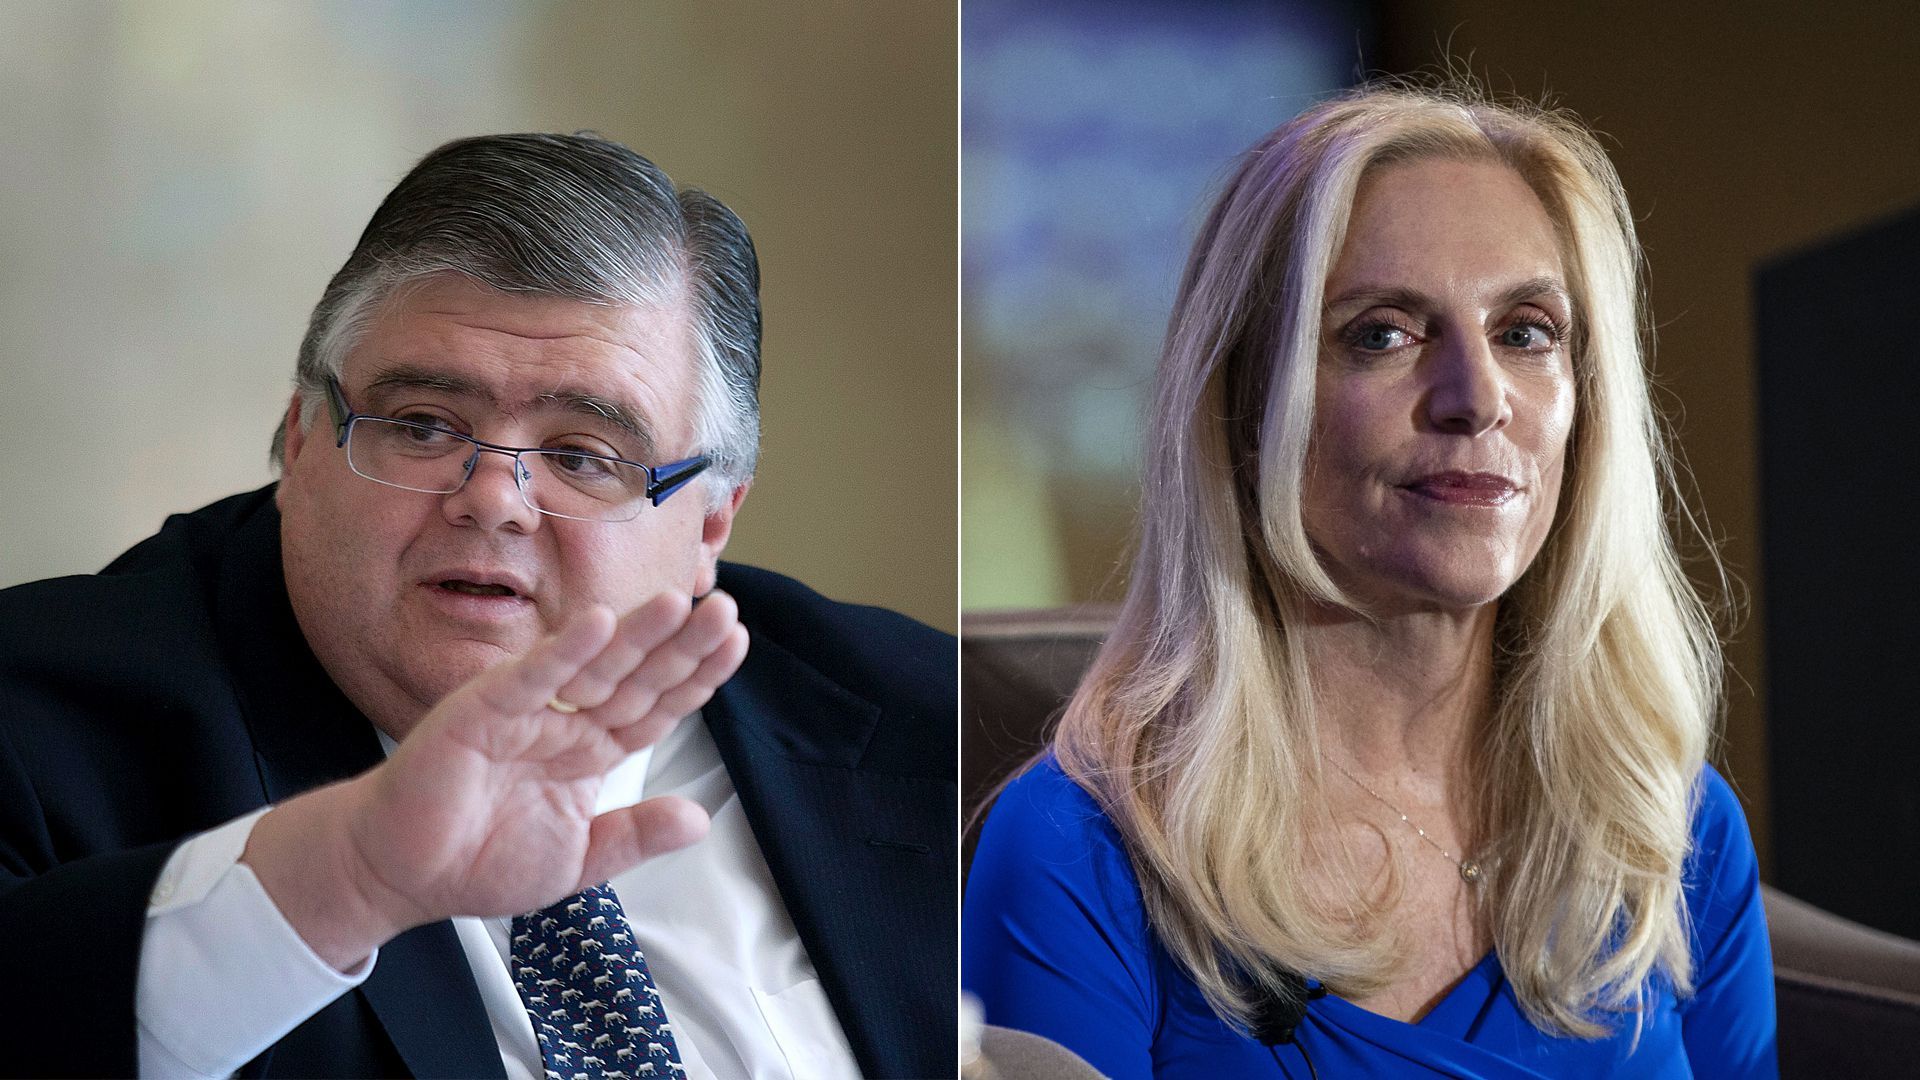 Bank for International Settlements general manager Augustin Carstens and Fed governor Lael Brainard. Photos by Susana Gonzalez/Bloomberg via Getty Images and Al Drago/Bloomberg via Getty Images